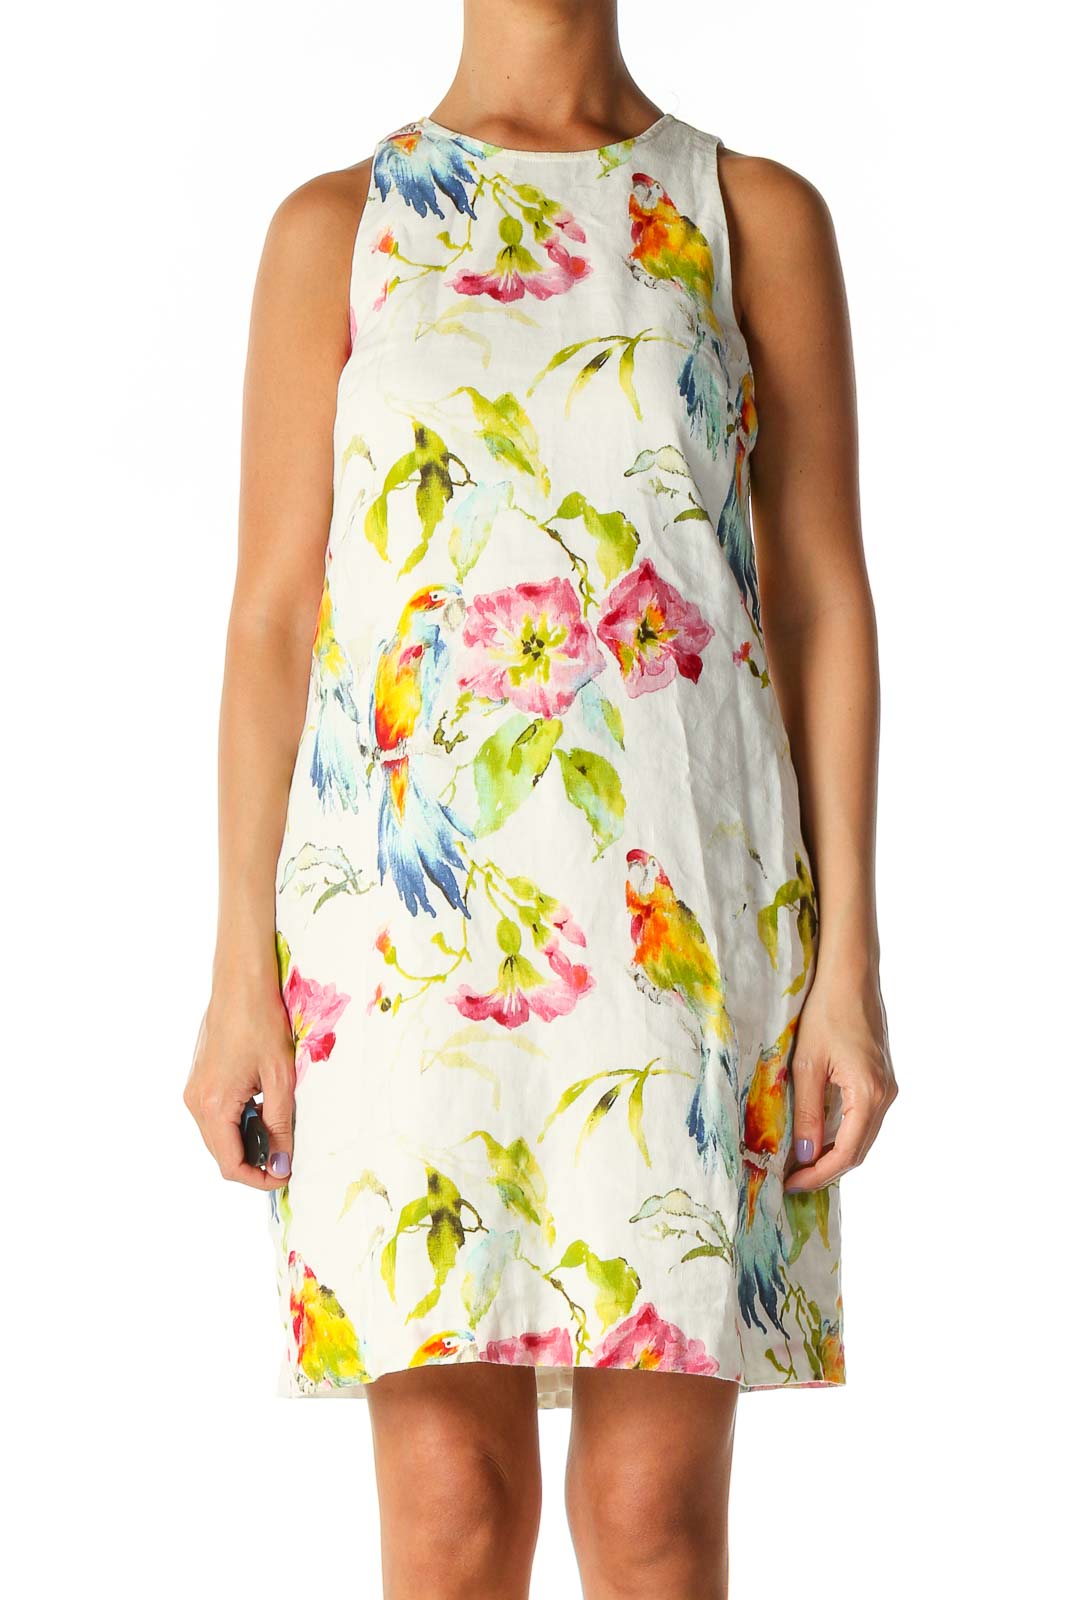 White Floral Print Casual A-Line Dress Front